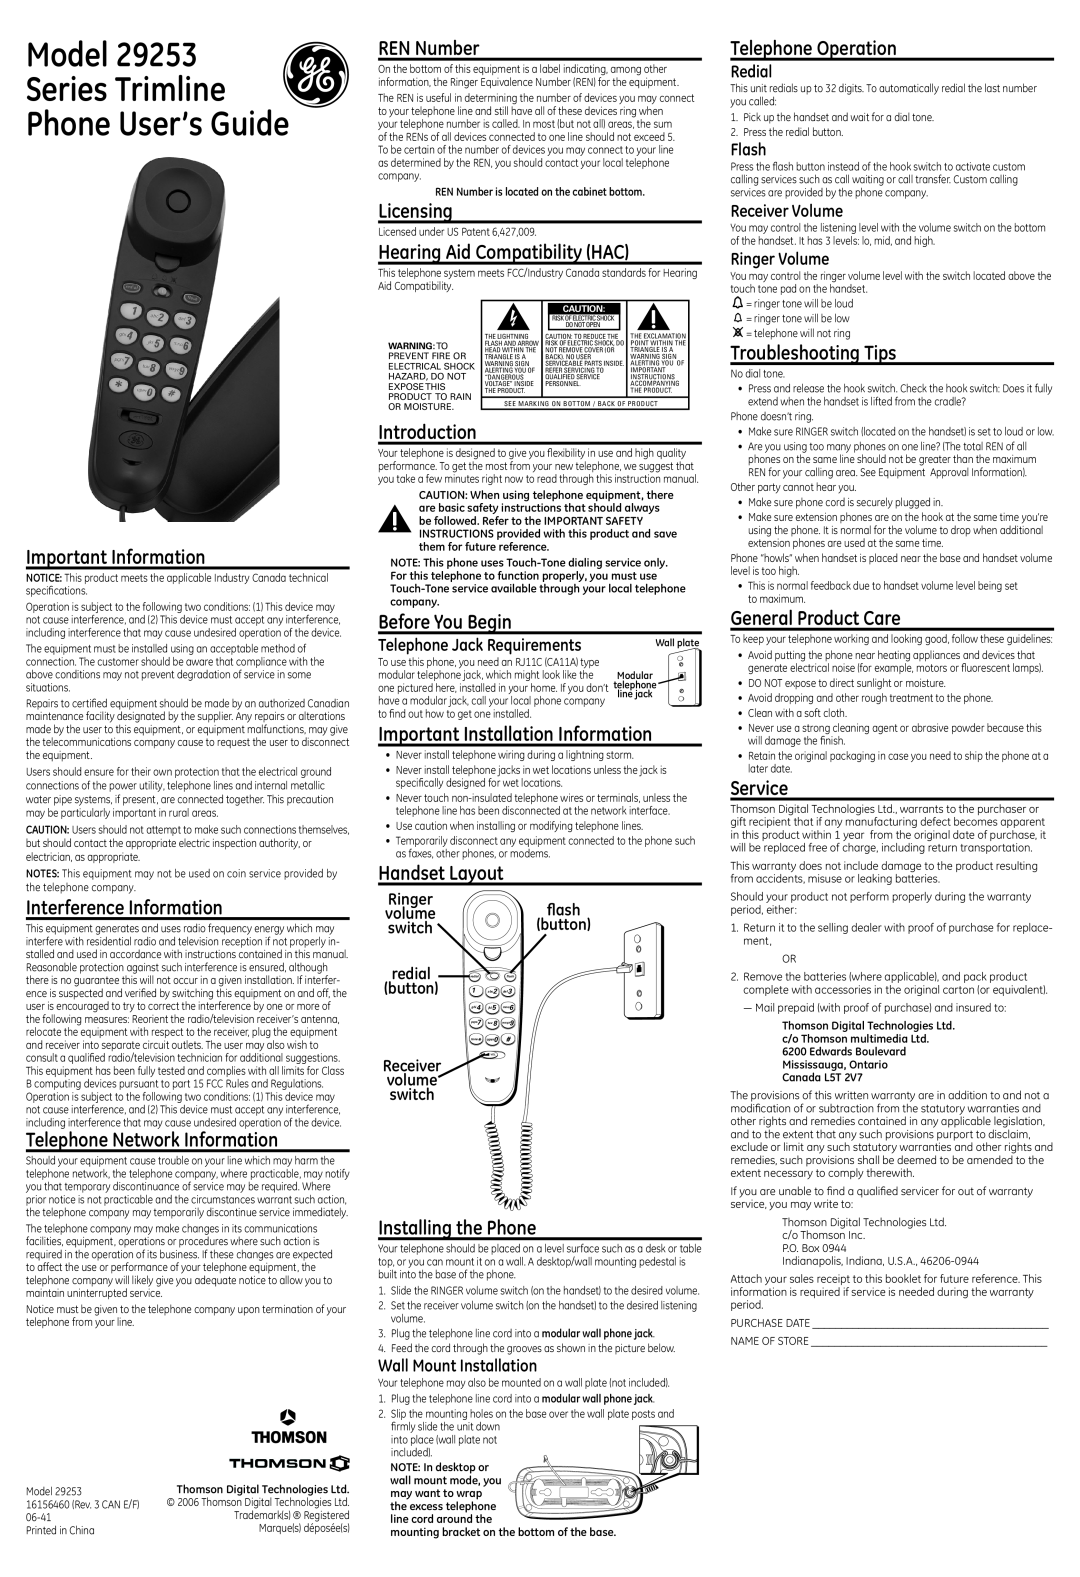 GE 29253 technical specifications Model Series Trimline Phone User’s Guide 